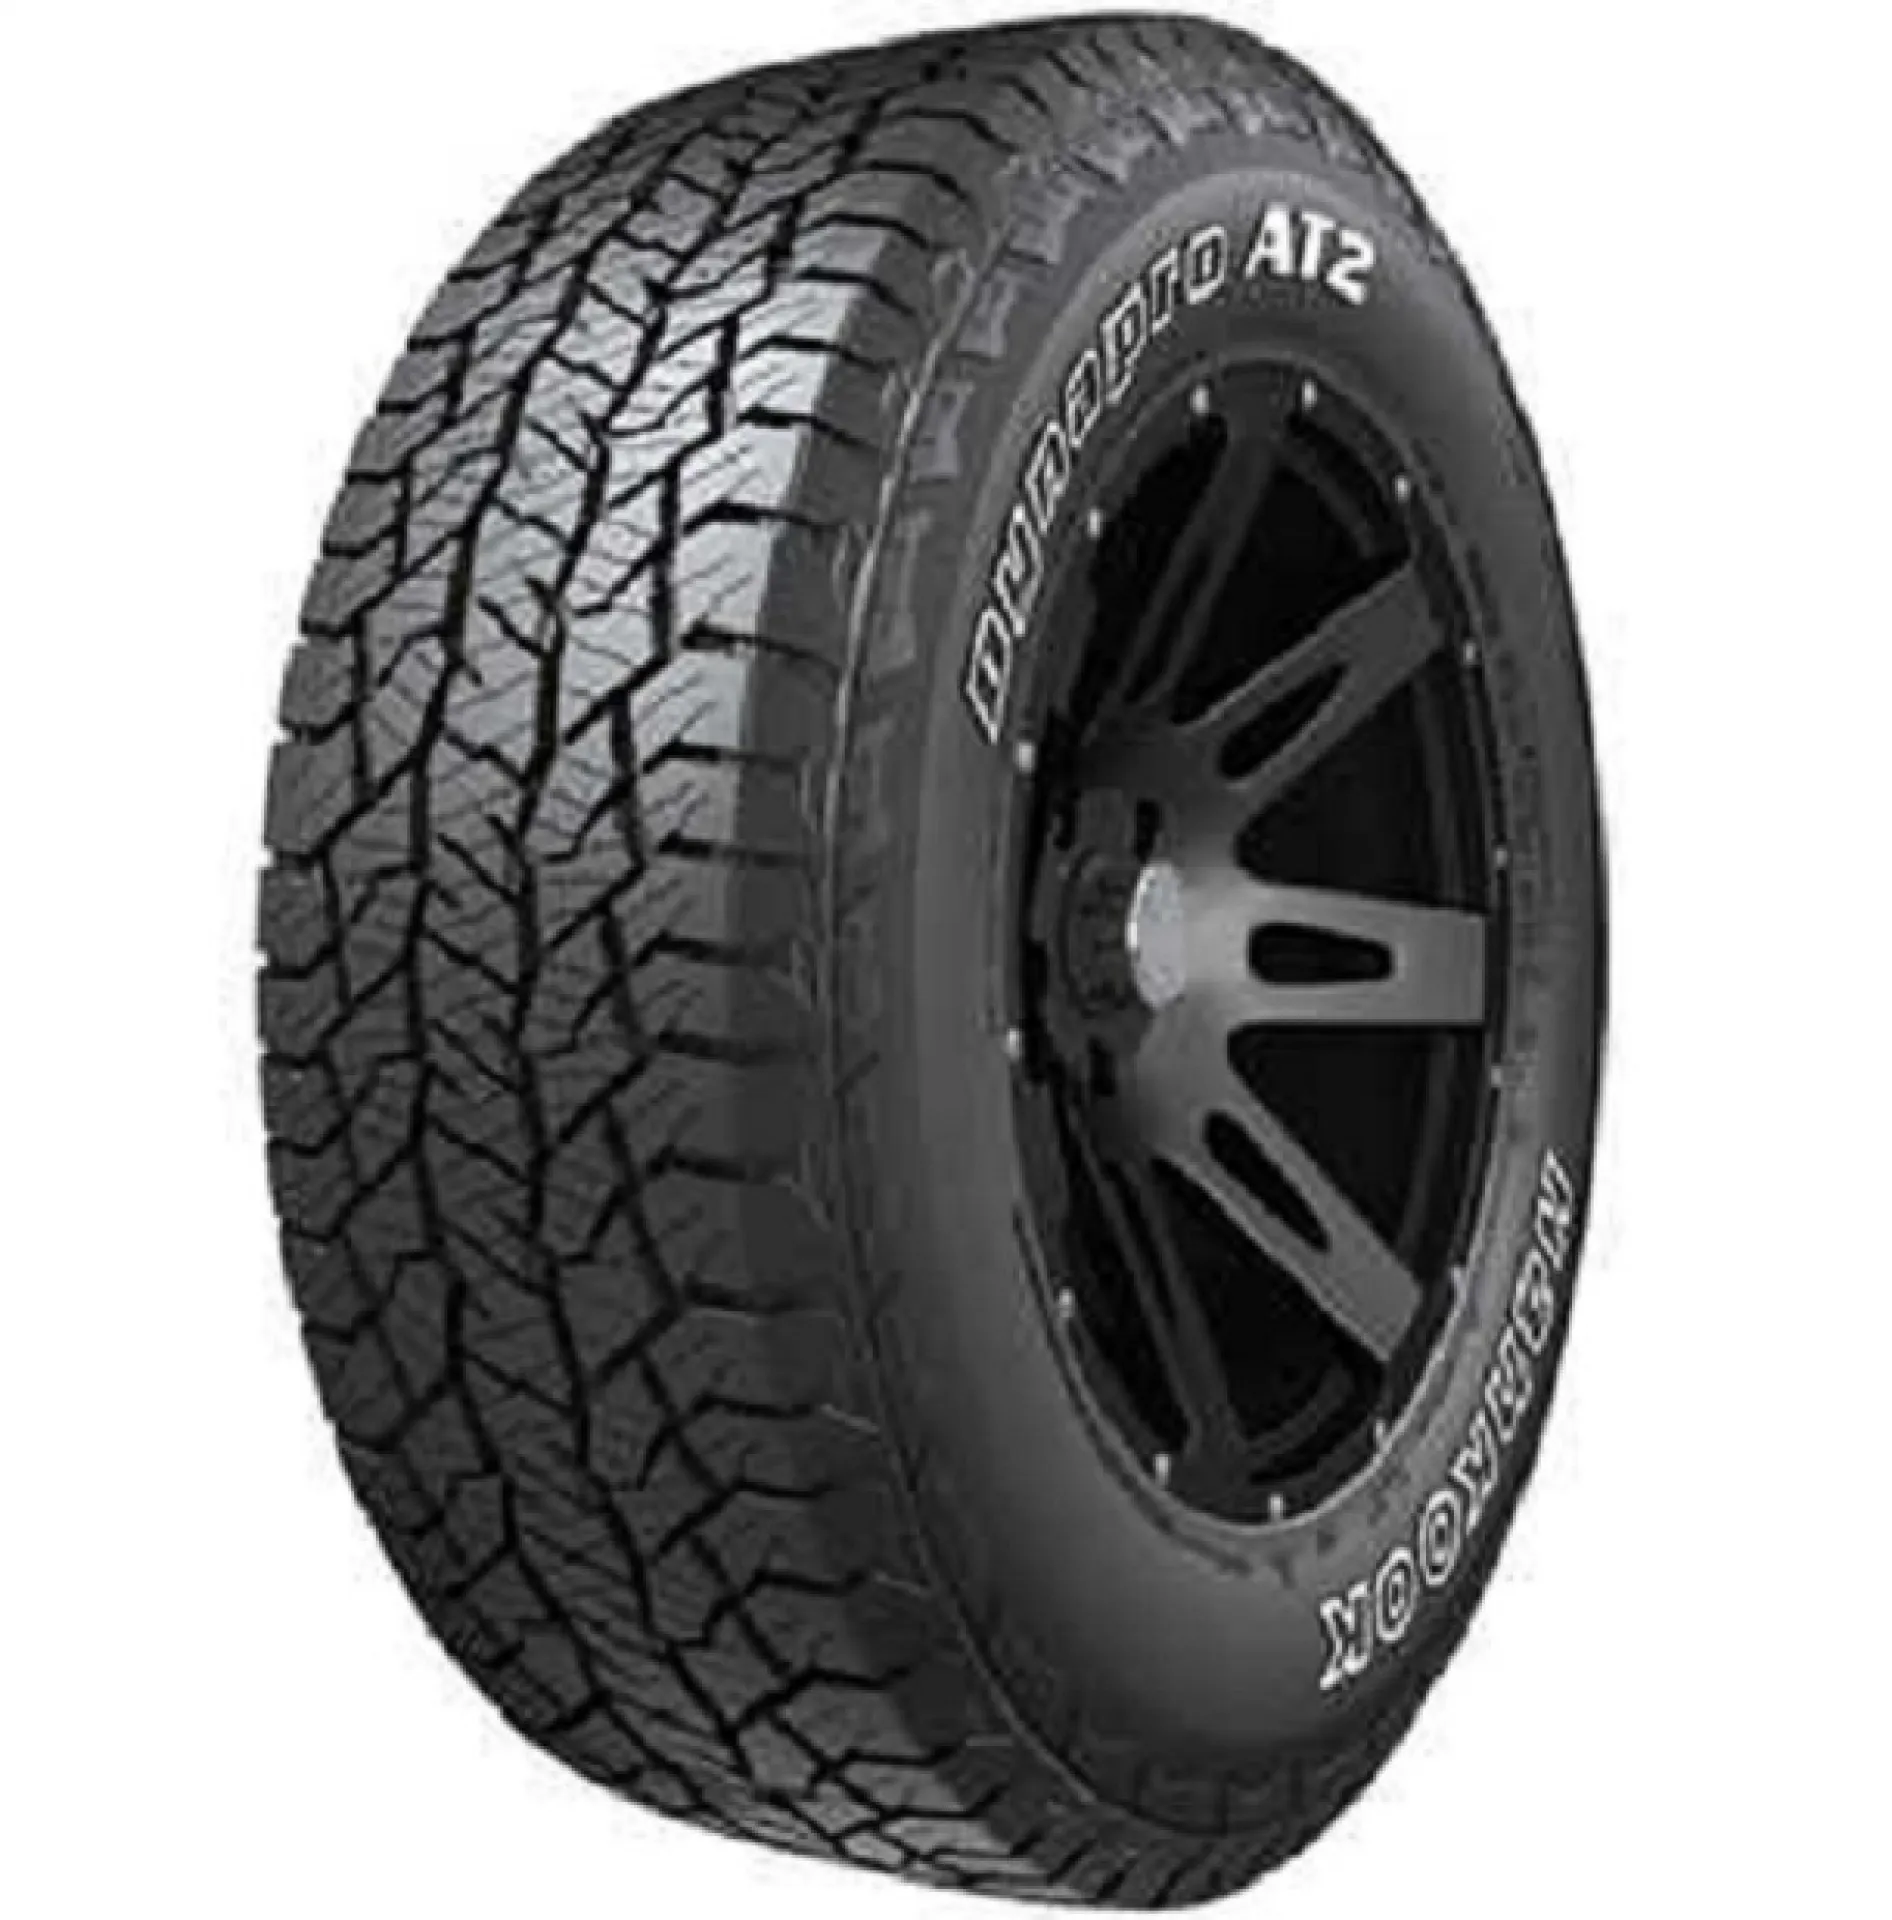 Hankook Dynapro AT2 245/75R16 120S M+S